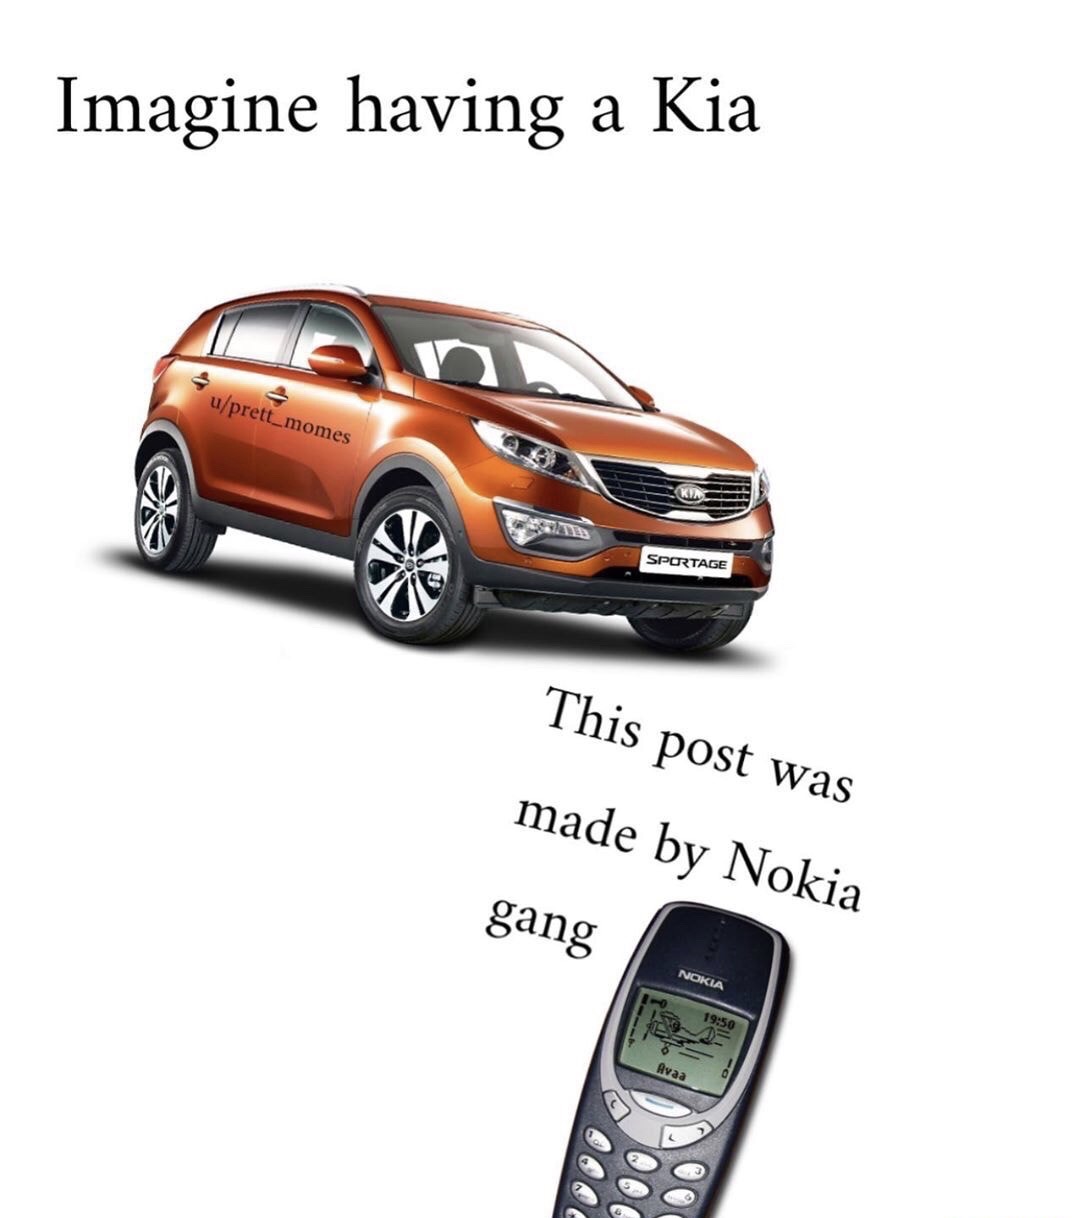 Imagine having a Kia uprett_momes Sportage This post was made by Nokia gang Nokia Avaa Q0